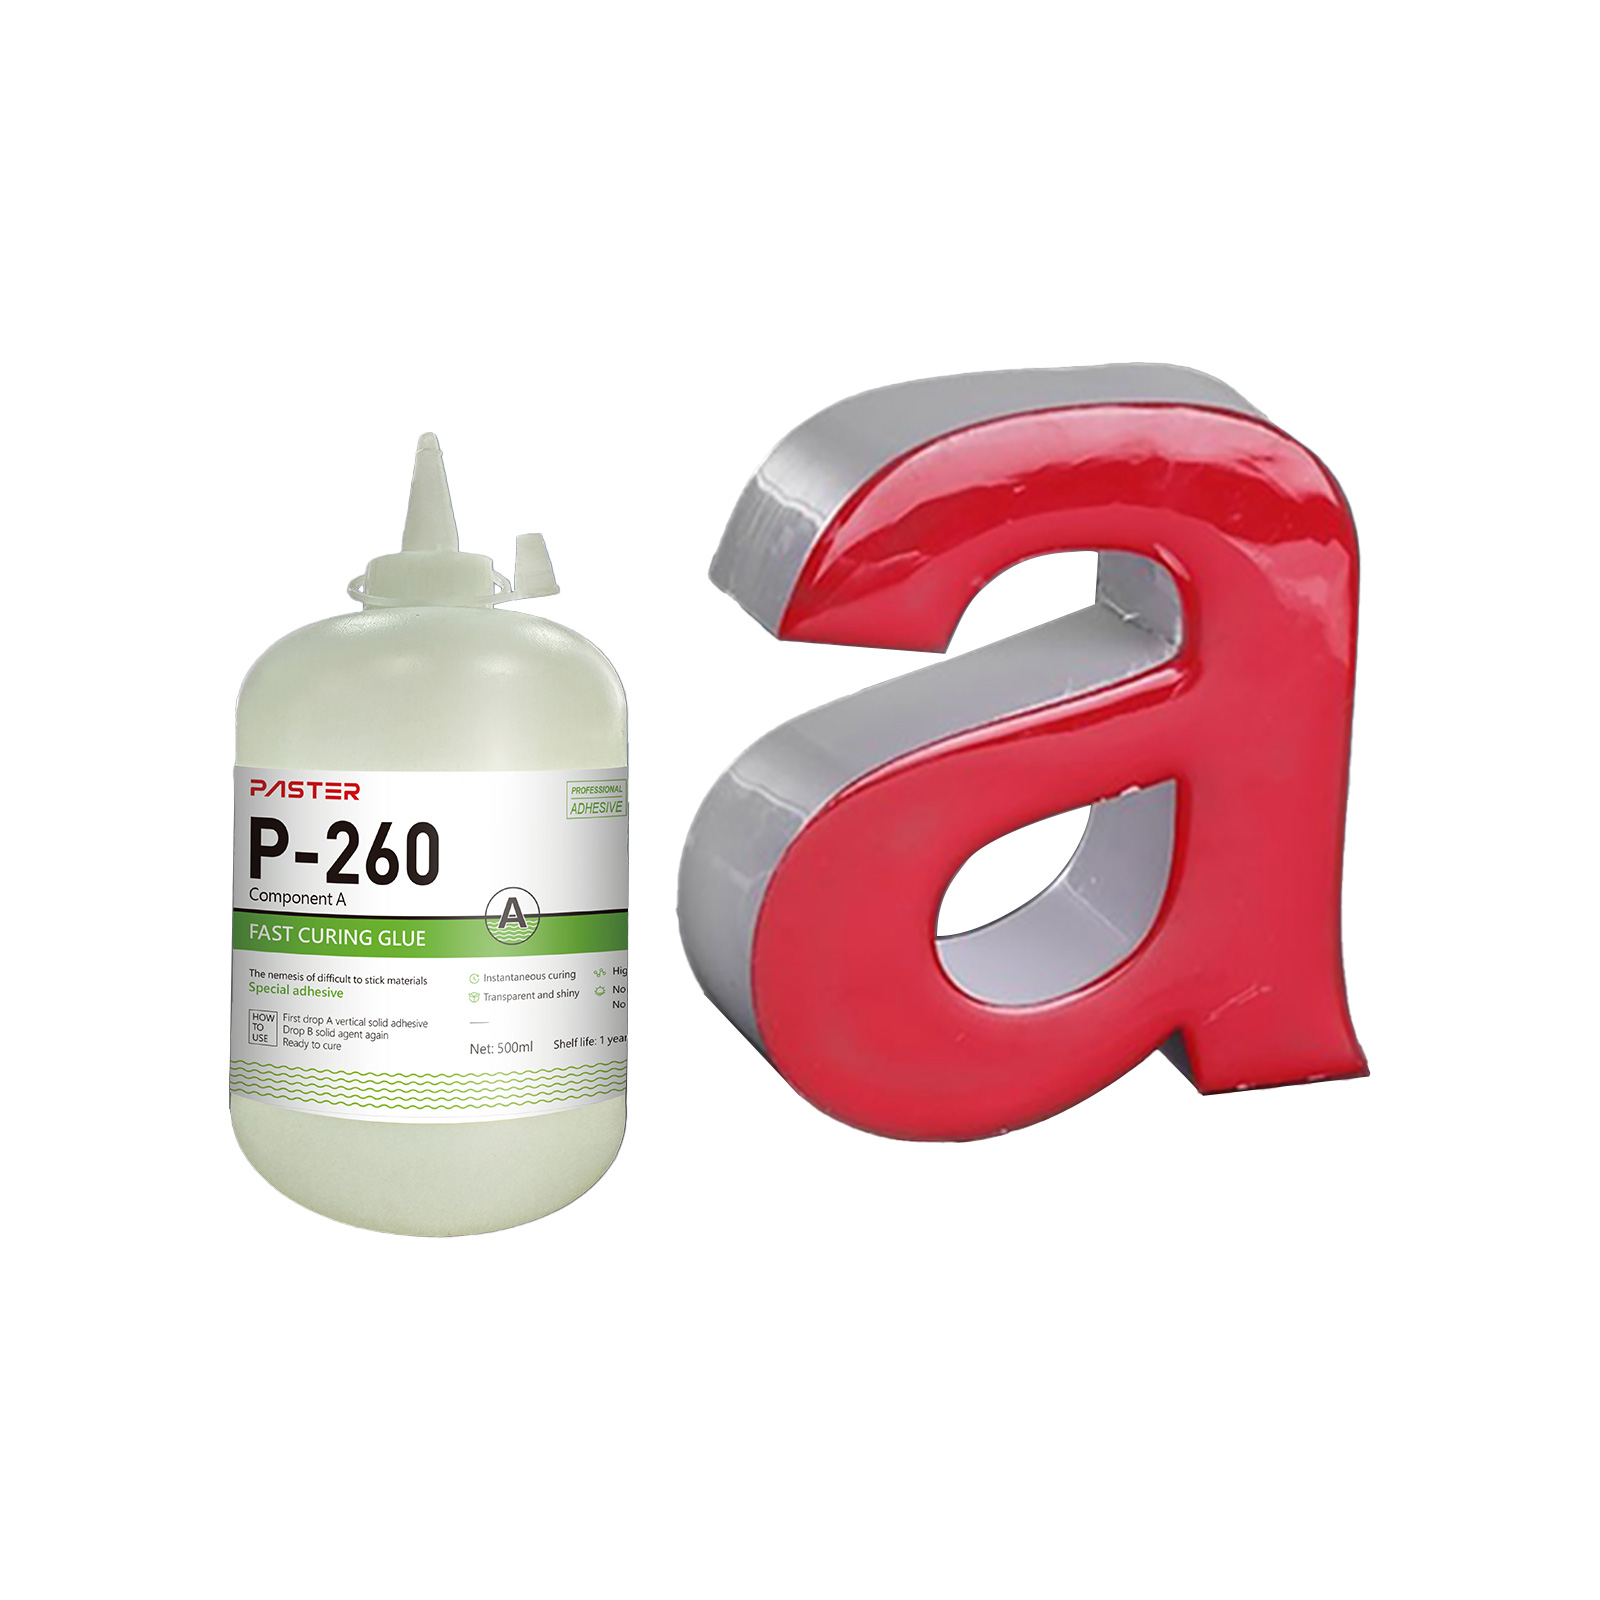 Sample-P-260A FAST CURING GLUE for channel letter